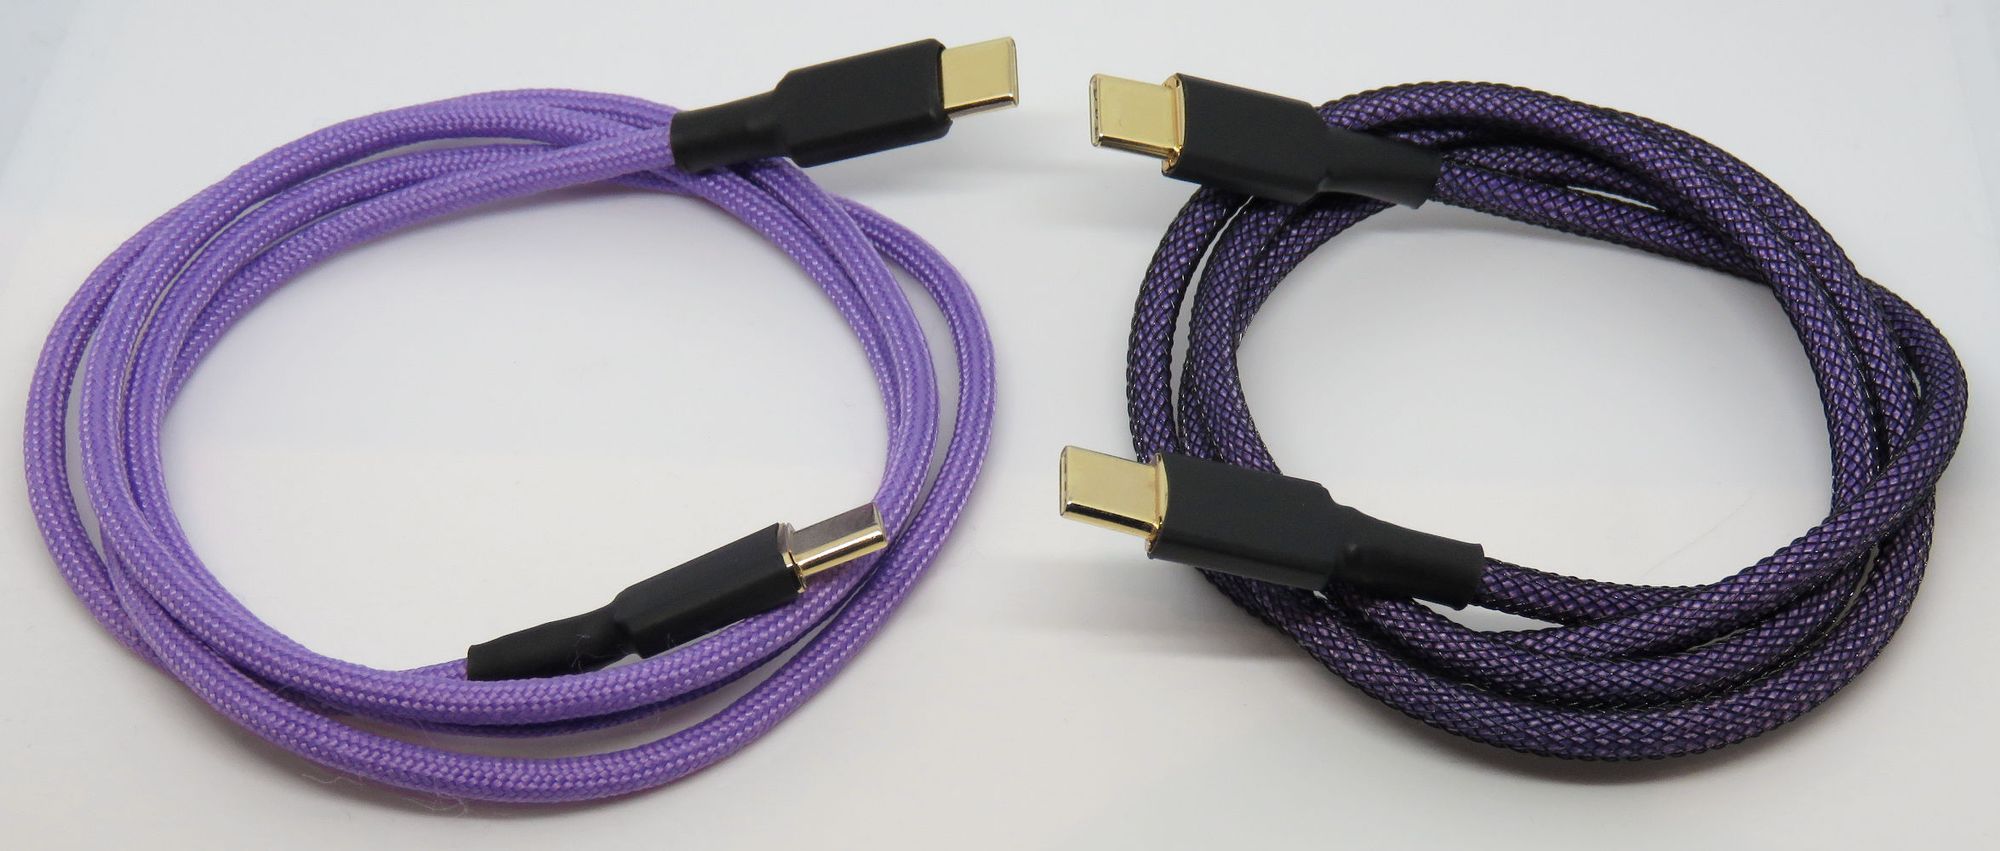 Image of two sleeved USB cables